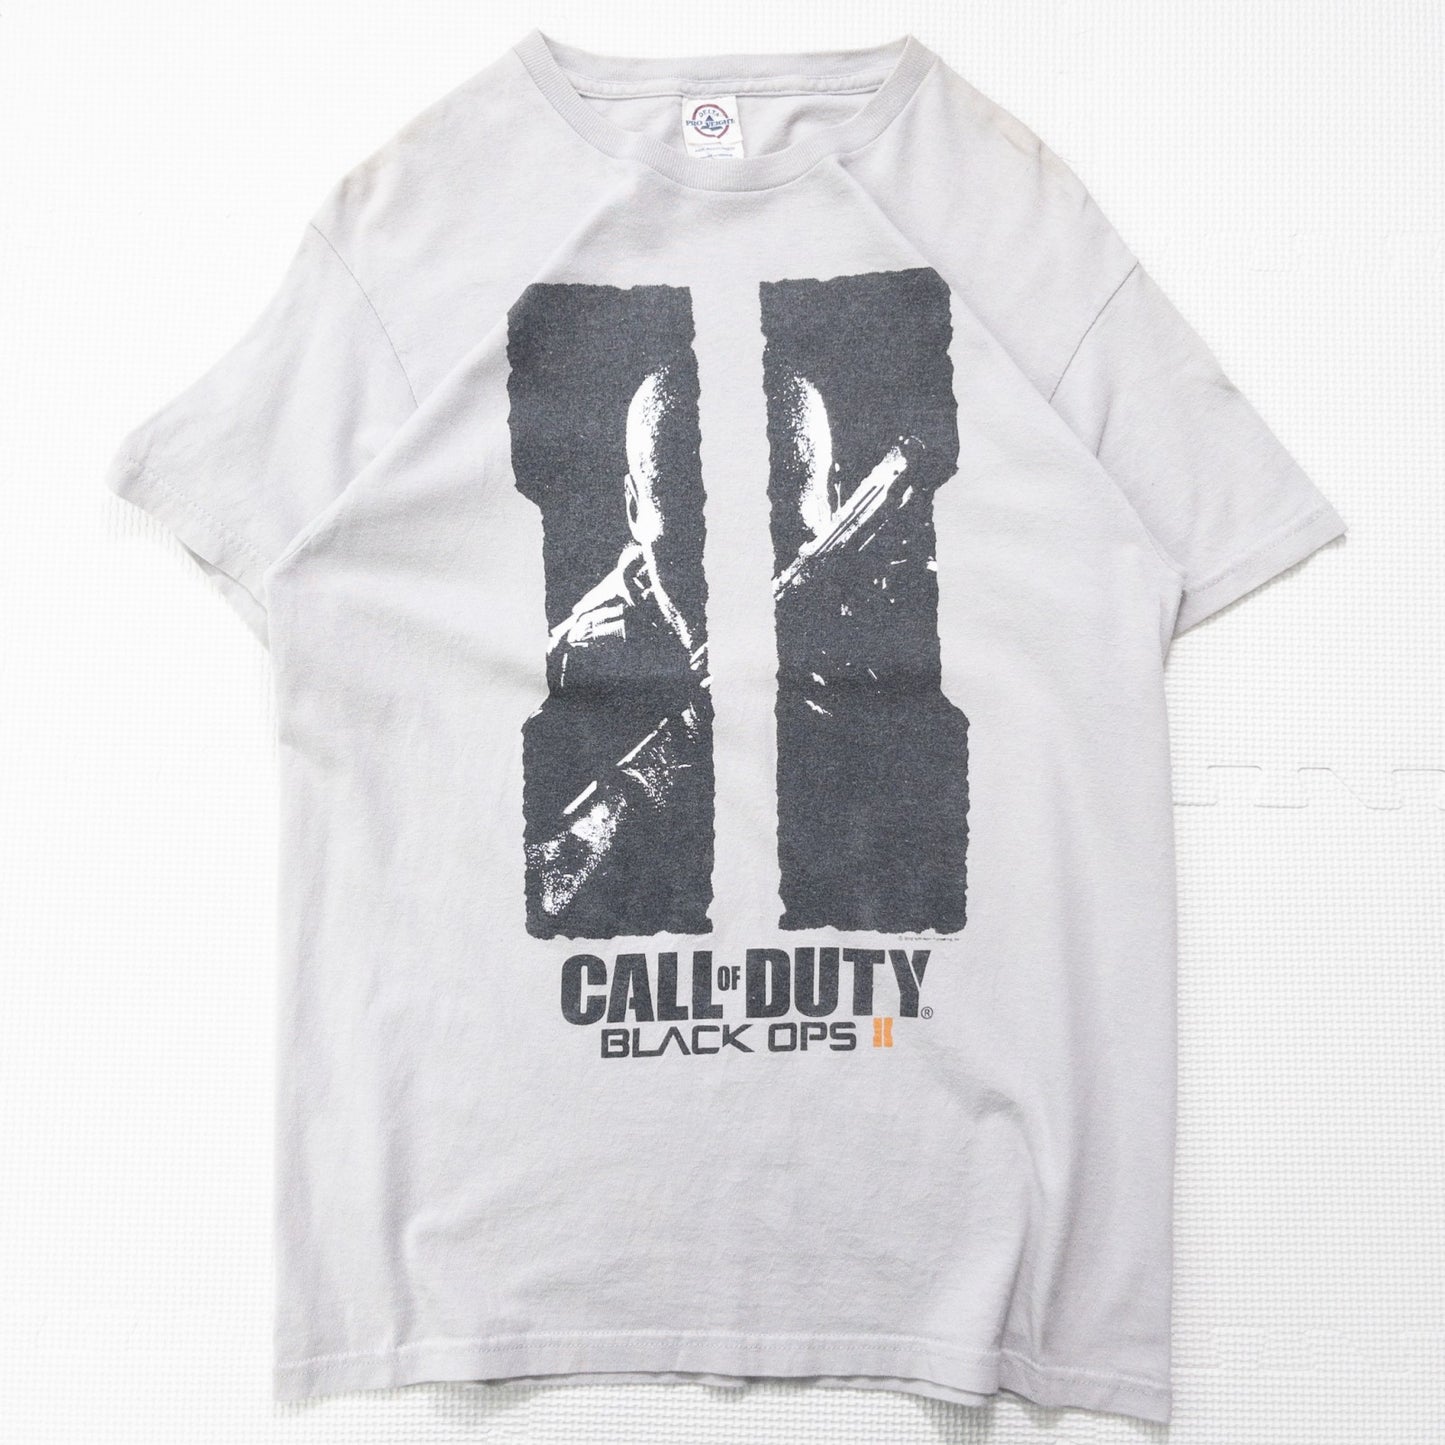 00s CALL OF DUTY ”BLACK OPS2” M